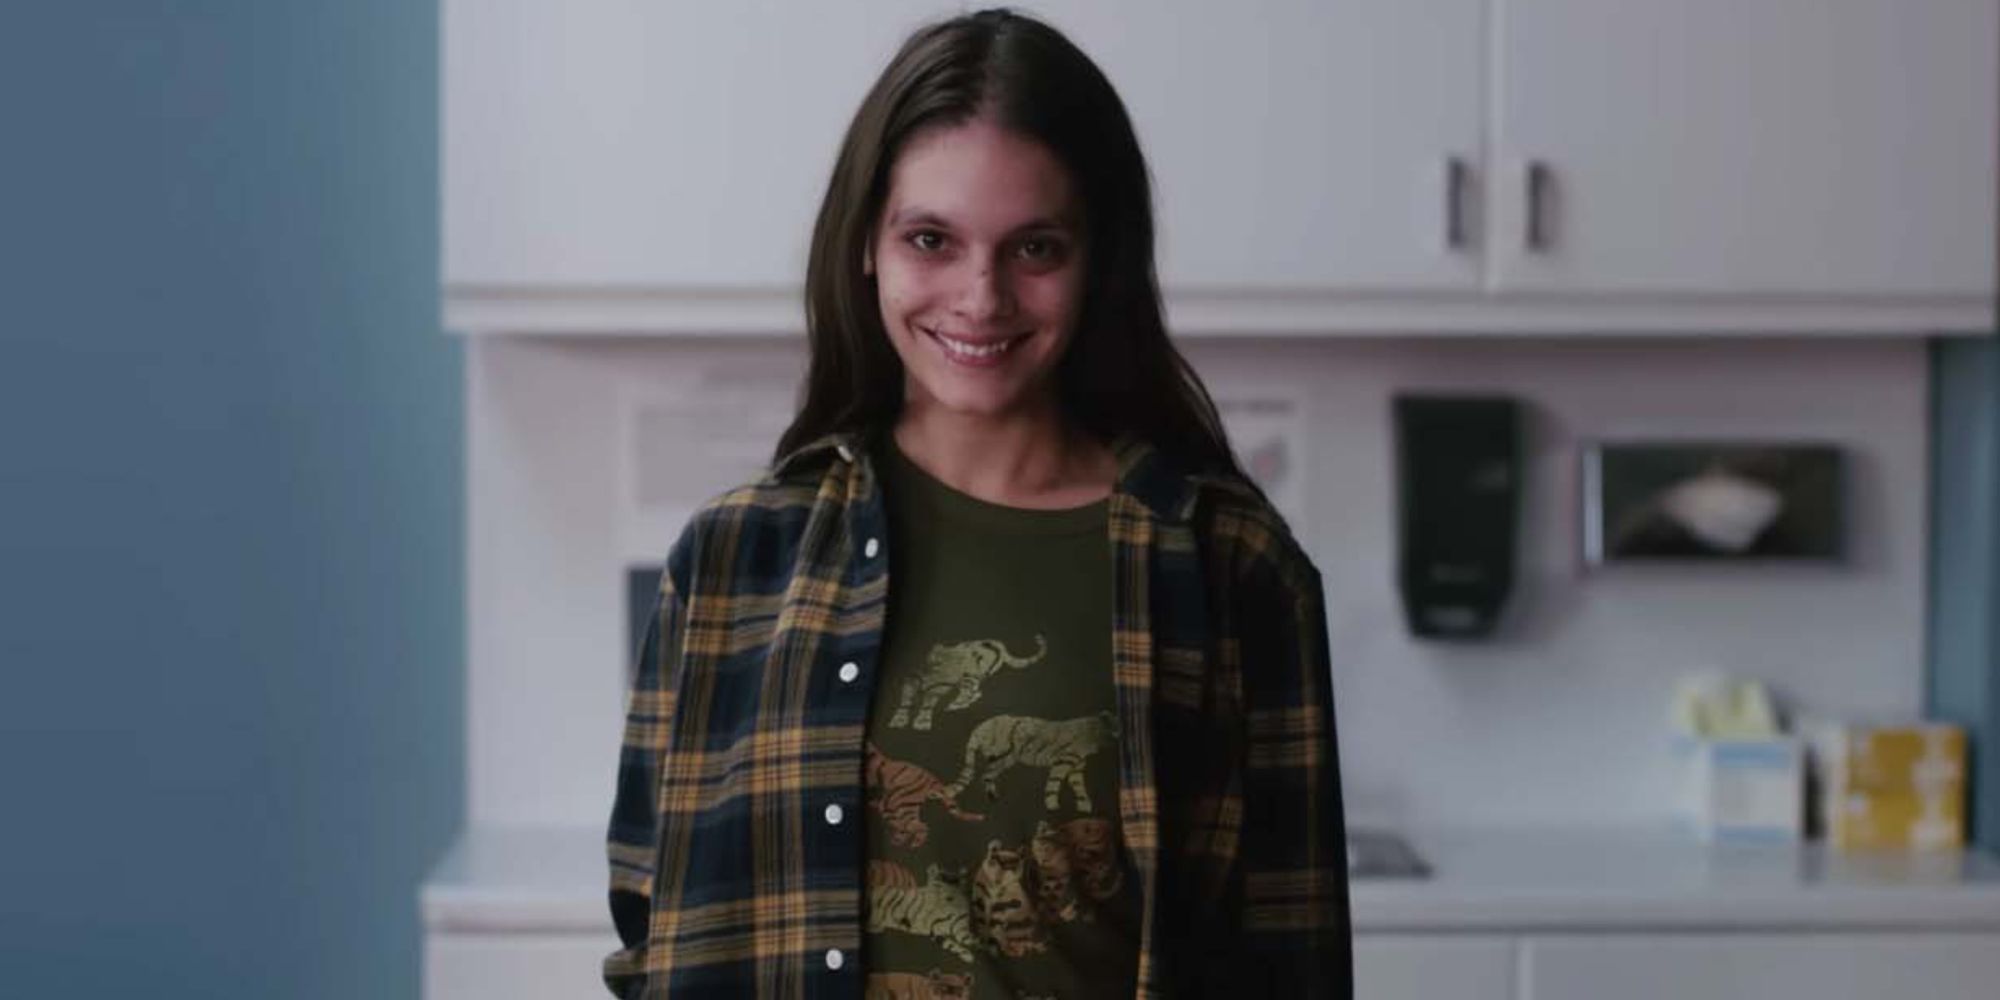 Caitlin Stasey in Smile (2022)